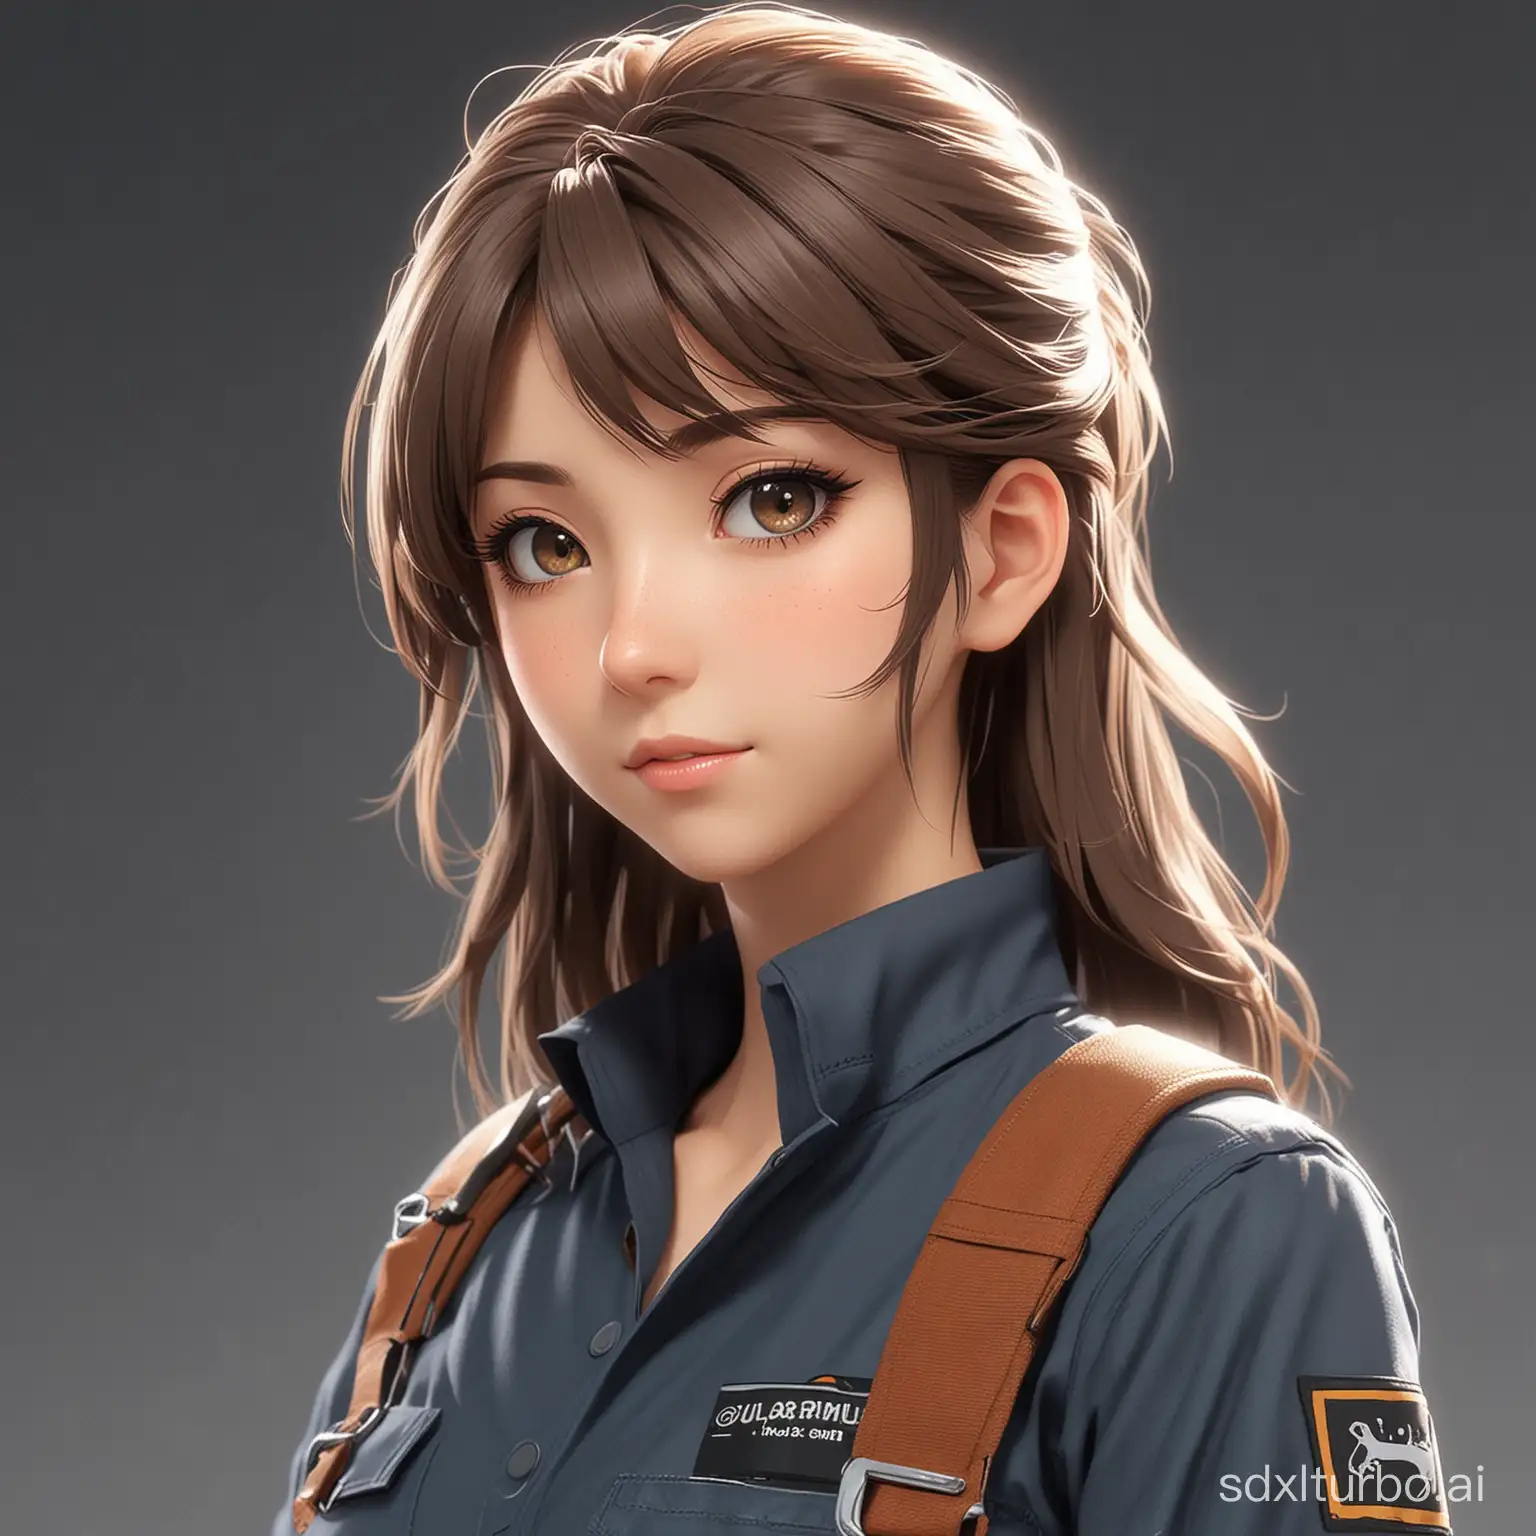 Anime character that looks like a mechanic, I want the background to be transparent. Should look serious but cute, zoomed out. Cinematic.